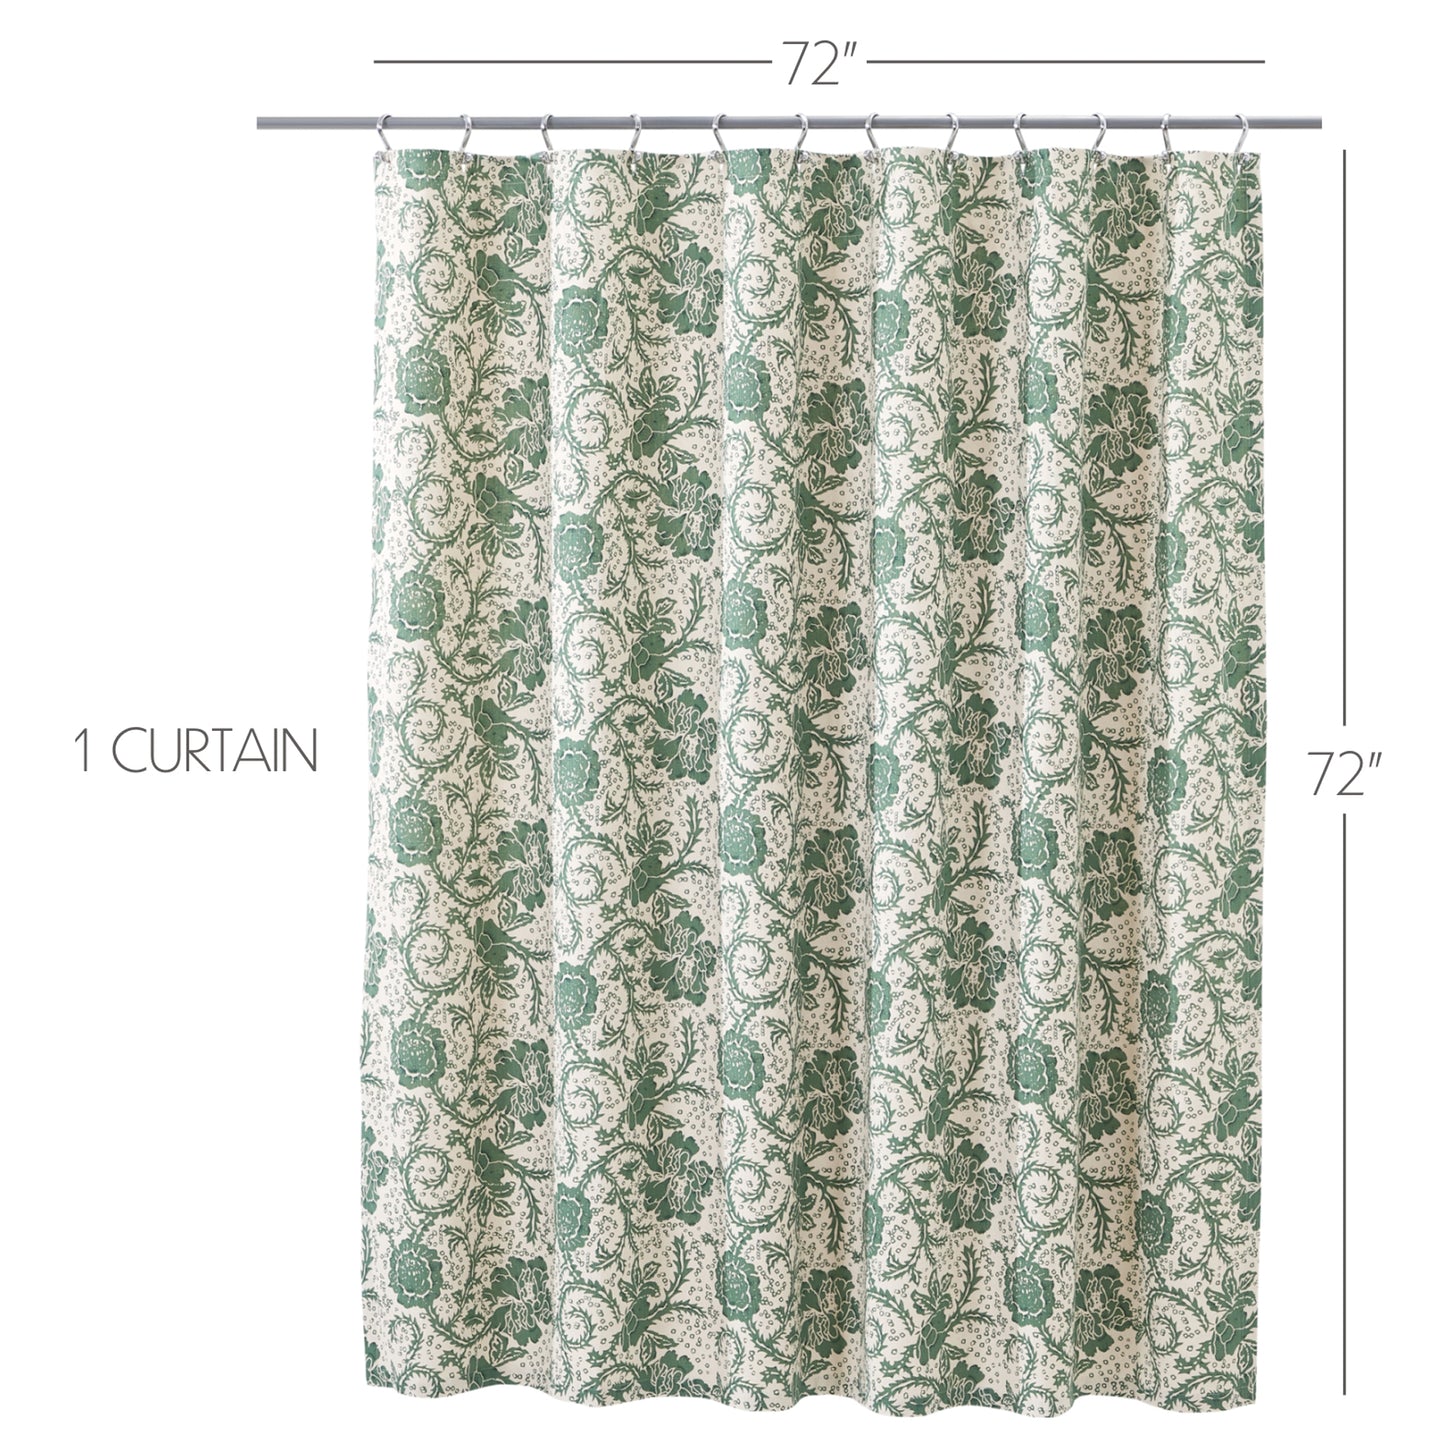 81234-Dorset-Green-Floral-Shower-Curtain-72x72-image-1